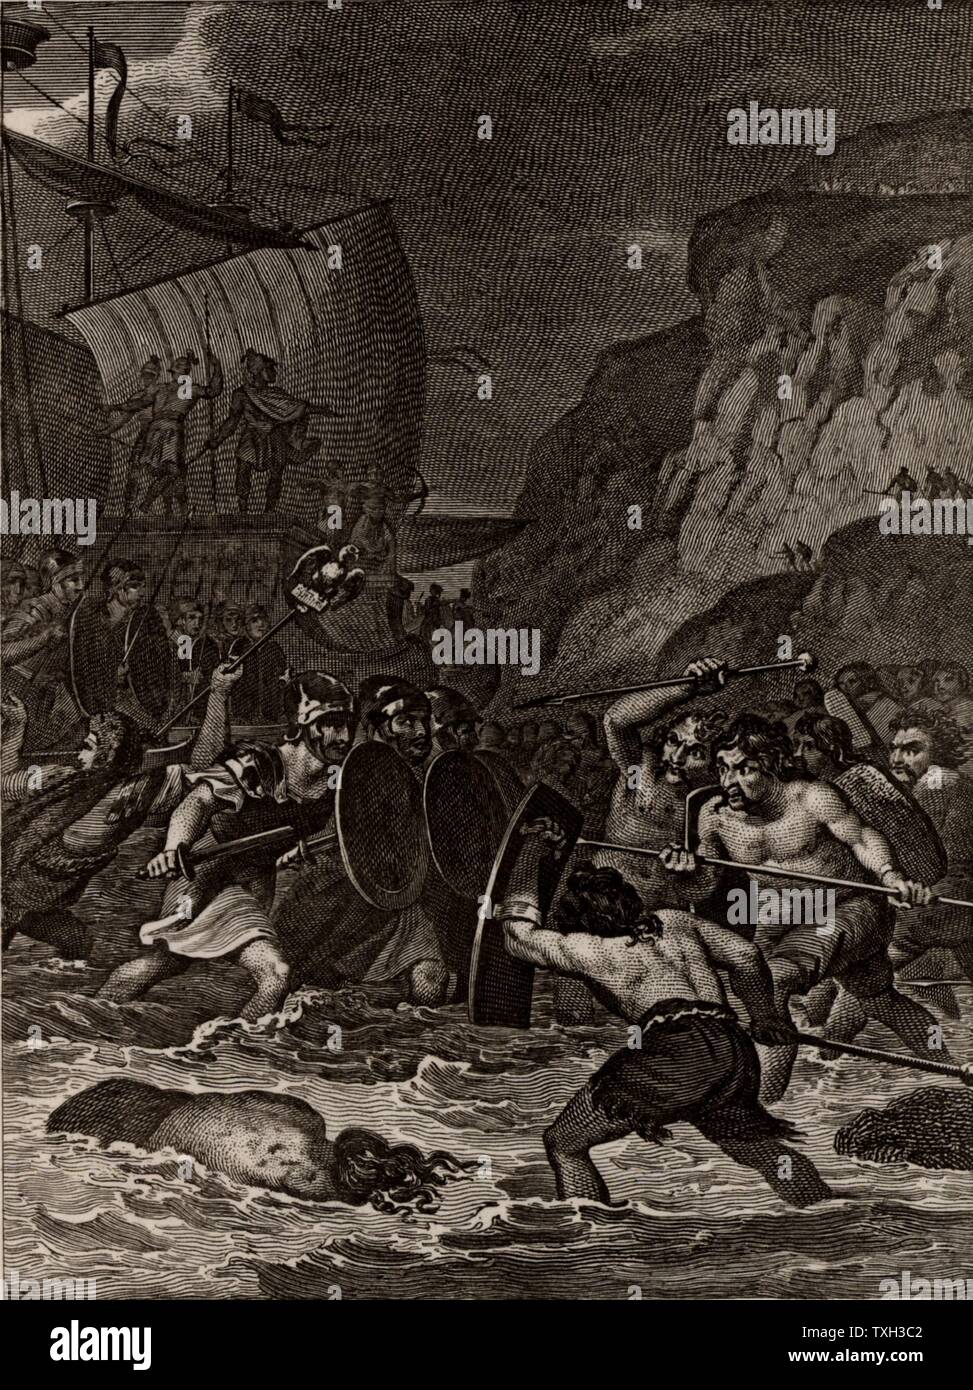 Roman troops under Julius Caesar invading Britain in 55 BC.  From 'The Imperial History of England' by Theophilus Camden (London, 1832). Engraving. Stock Photo